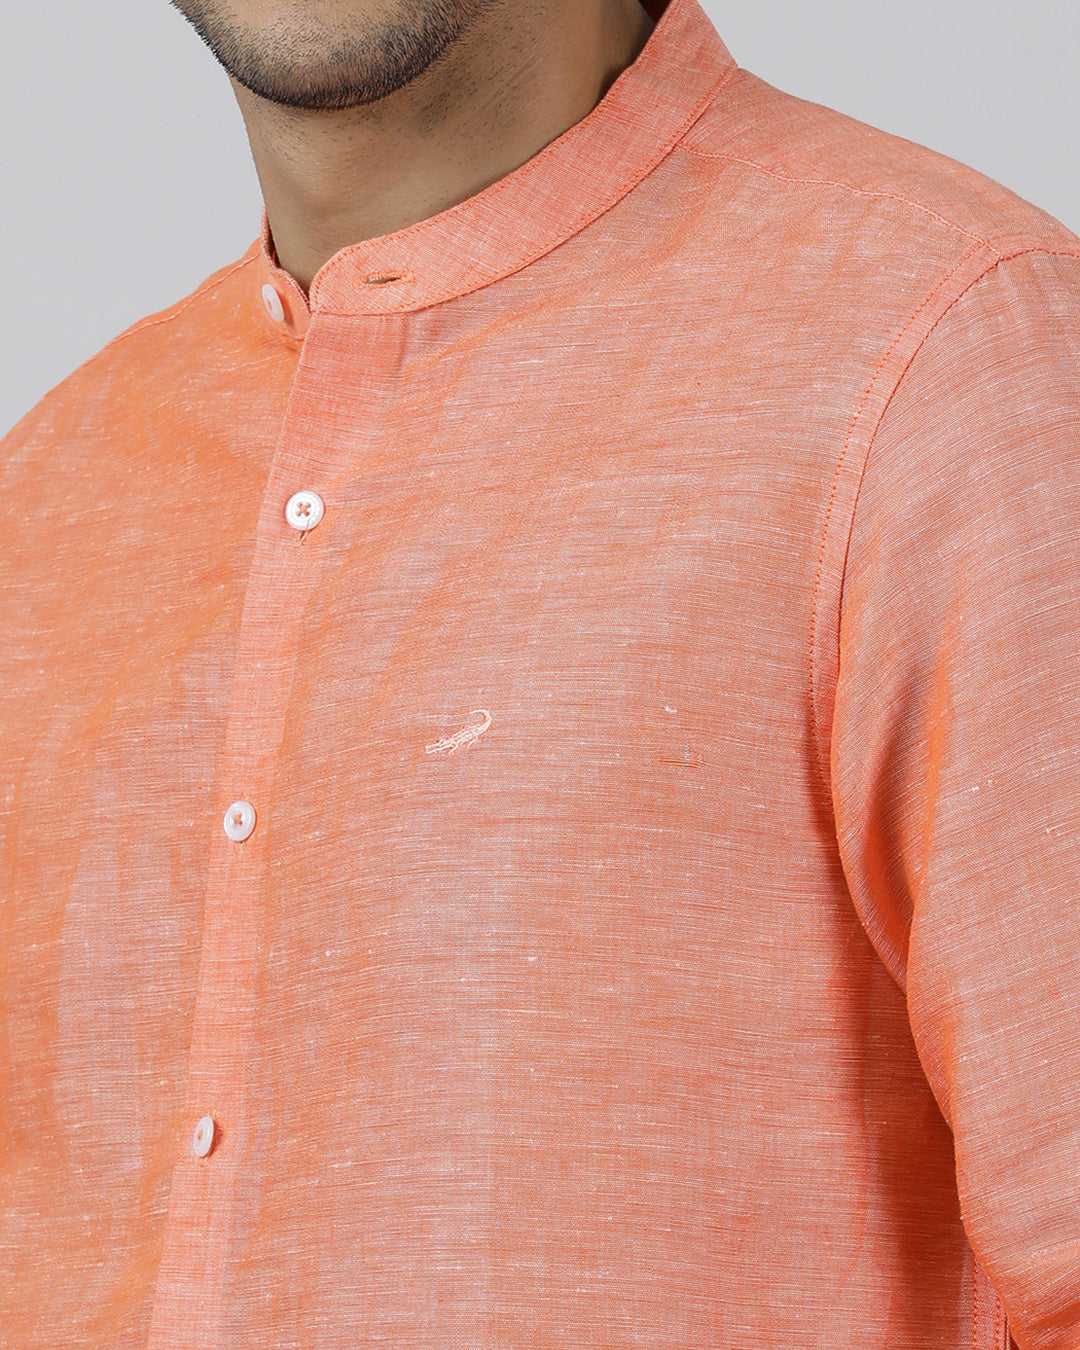 Casual Orange Full Sleeve Regular Fit Solid Shirt with Collar for Men